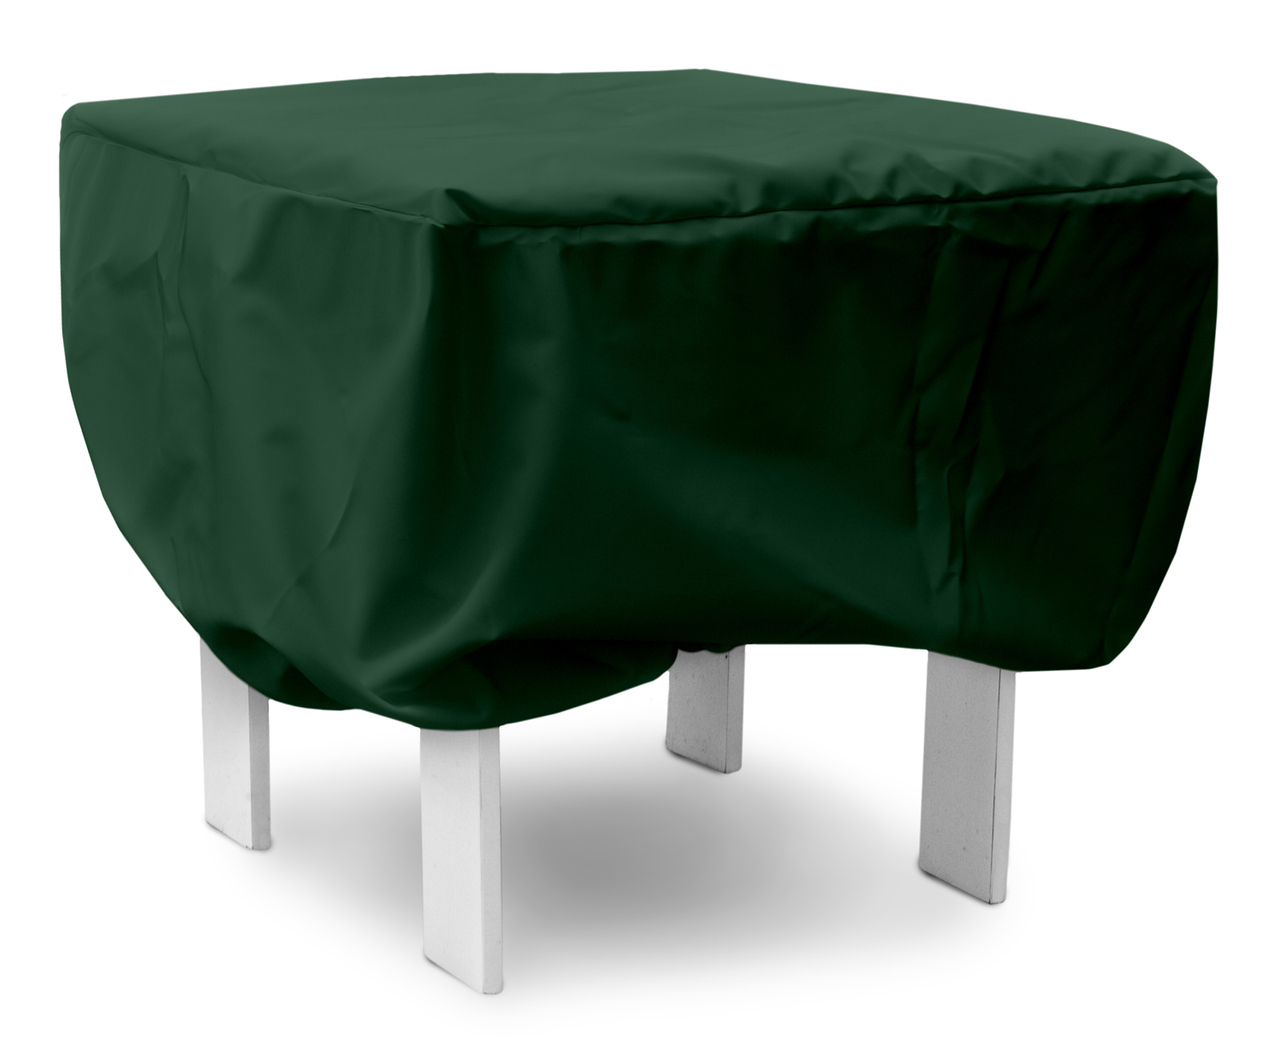 Small Square Table Cover - 41L x 41W x 18H in.